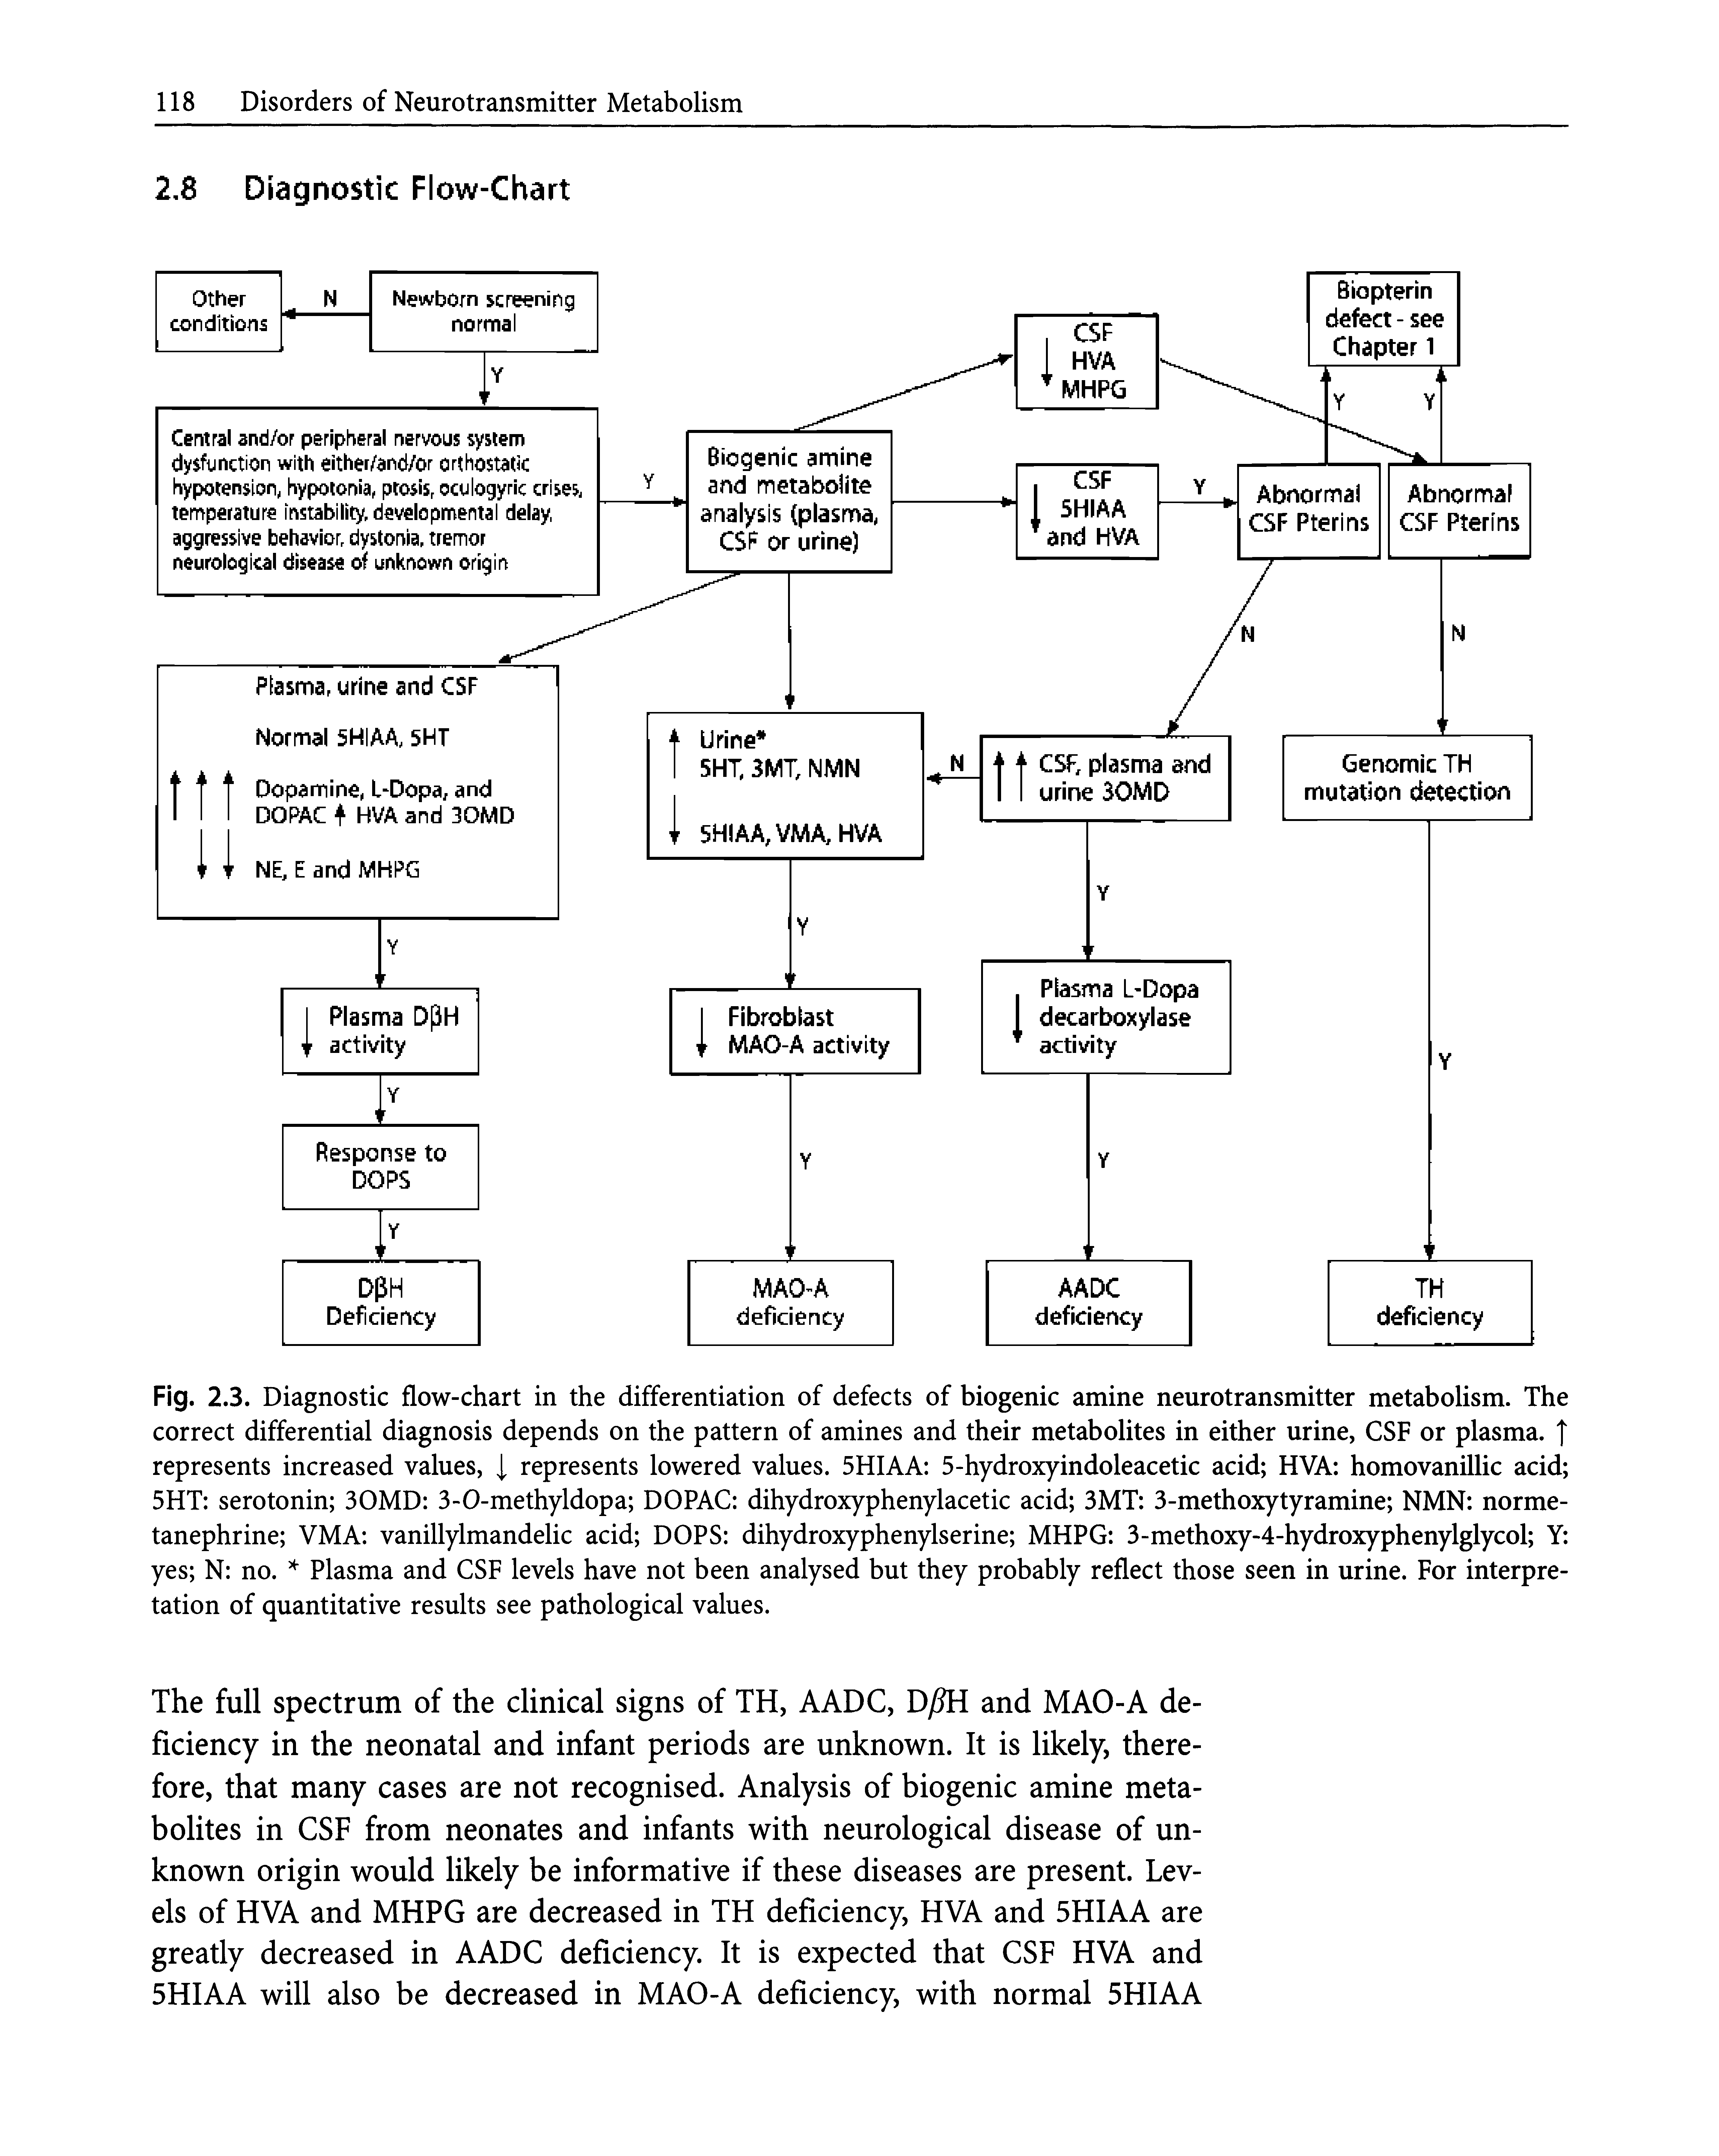 Fig. 2.3. Diagnostic flow-chart in the differentiation of defects of biogenic amine neurotransmitter metabolism. The correct differential diagnosis depends on the pattern of amines and their metabolites in either urine, CSF or plasma. represents increased values, [ represents lowered values. 5HIAA 5-hydroxyindoleacetic acid HVA homovanillic acid 5HT serotonin 30MD 3-0-methyldopa DOPAC dihydroxyphenylacetic acid 3MT 3-methoxytyramine NMN norme-tanephrine VMA vanillylmandelic acid DOPS dihydroxyphenylserine MHPG 3-methoxy-4-hydroxyphenylglycol Y yes N no. Plasma and CSF levels have not been analysed but they probably reflect those seen in urine. For interpretation of quantitative results see pathological values.